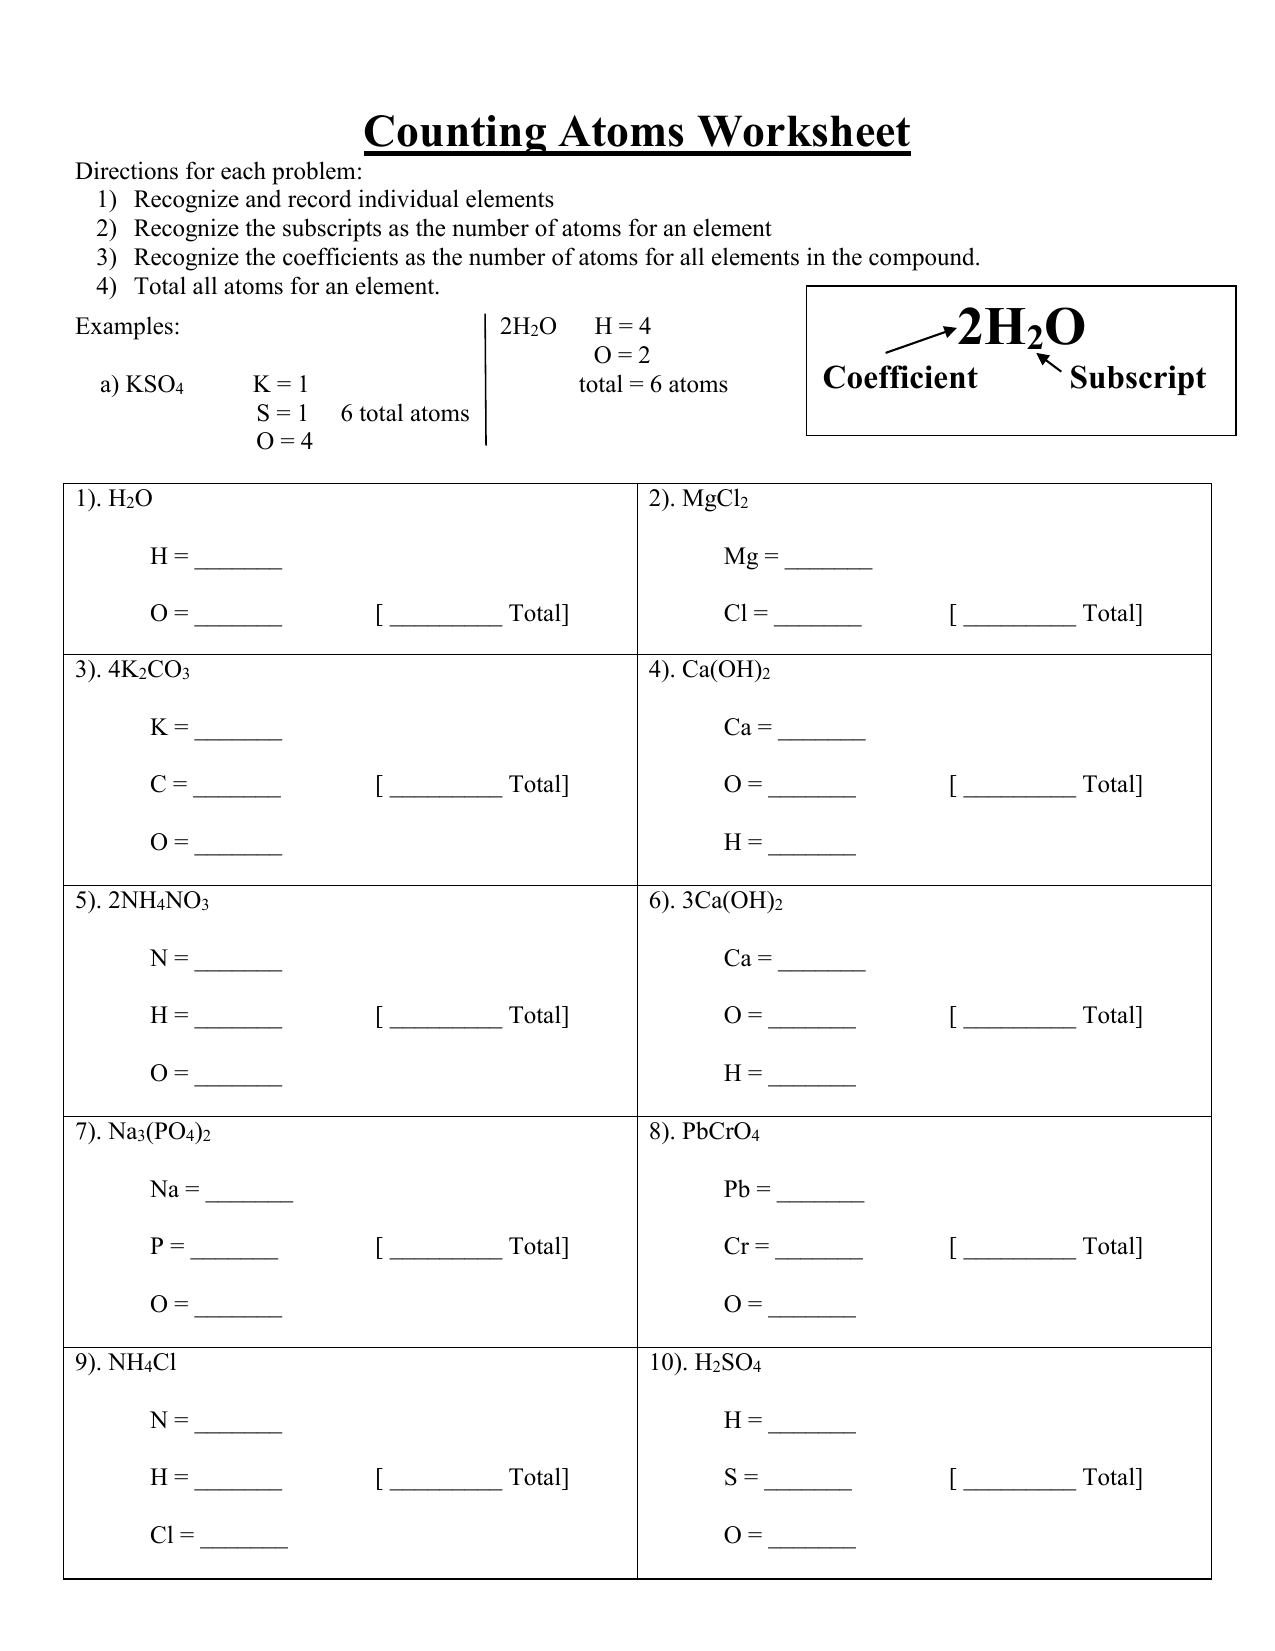 Counting Atoms #22 W.S. With Counting Atoms Worksheet Answers